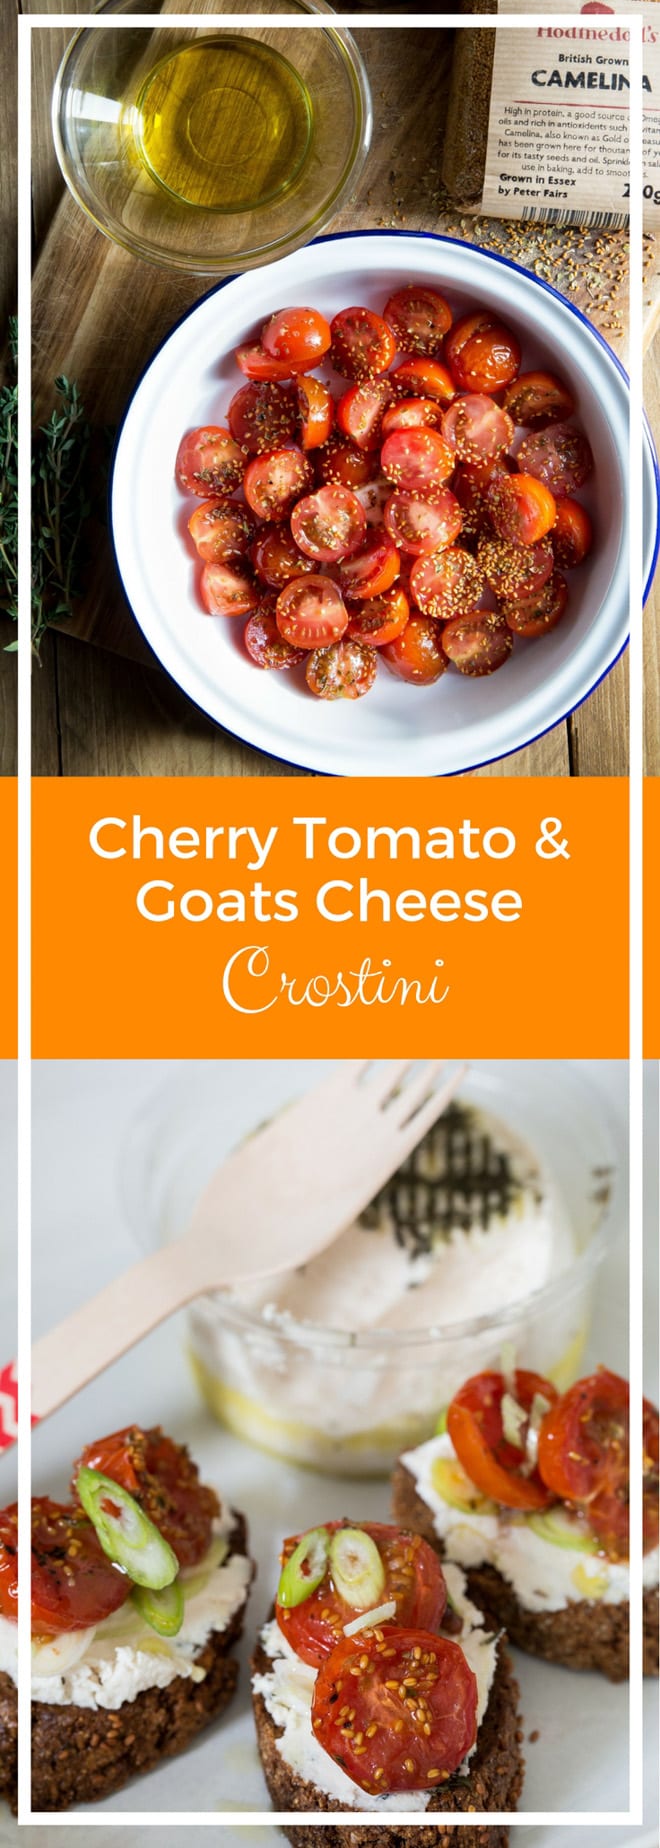 Cherry Tomato and Goat's Cheese Crostini - just a few simple ingredients make these salty, nutty bites sheer indulgent heaven. The New Roots goat's cheese makes them vegan too! thecookandhim.com